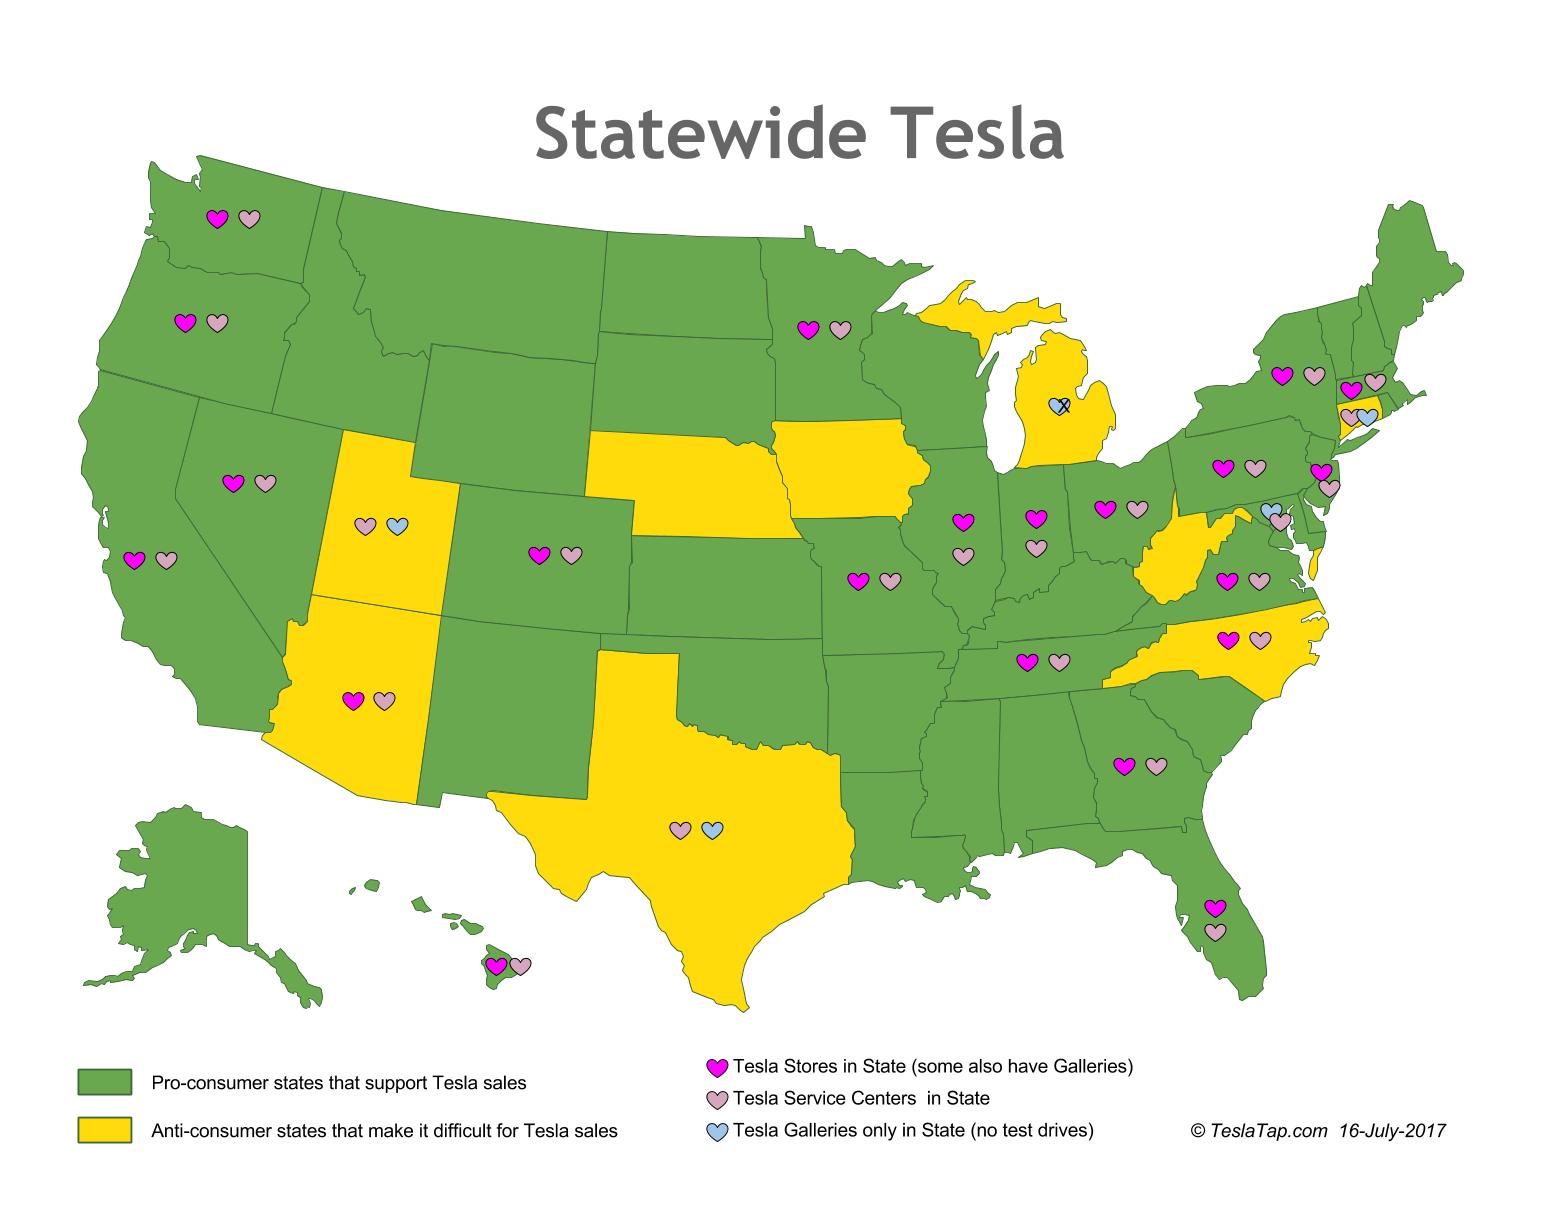 maps for ev benefits and tesla stores